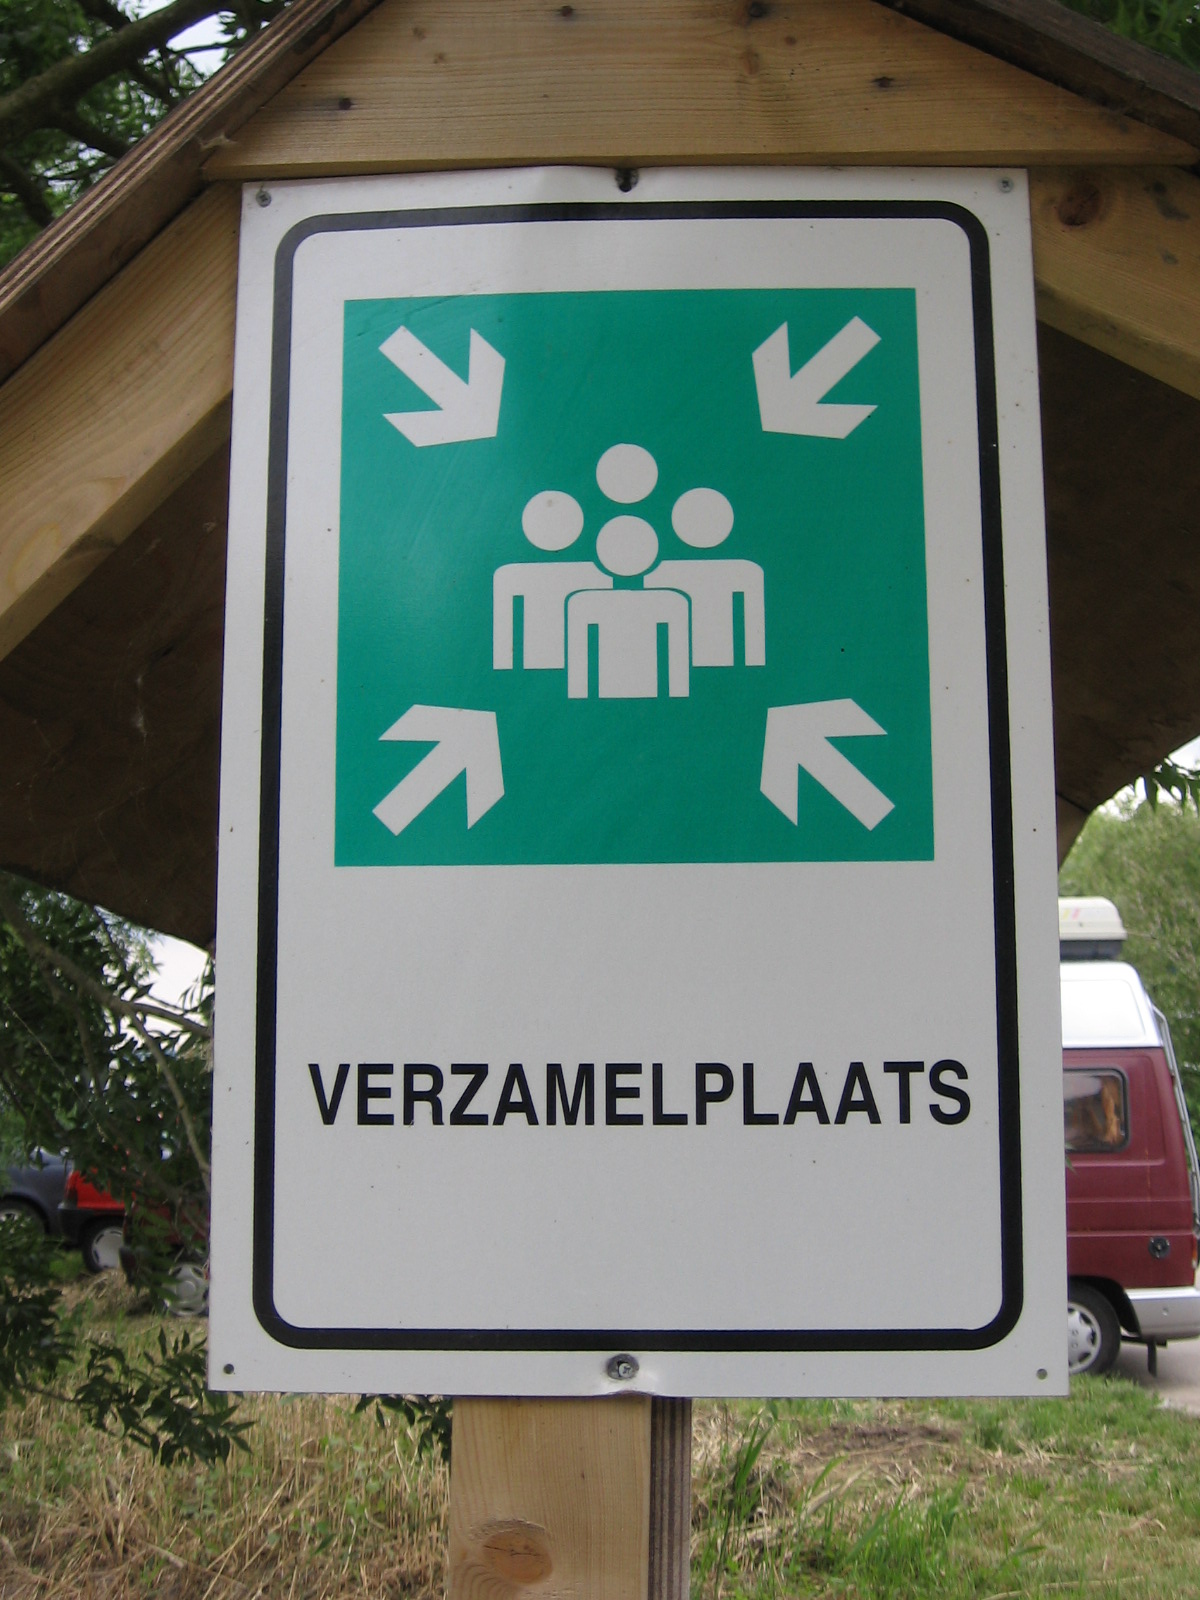 sign for a family in german that says veramieplats